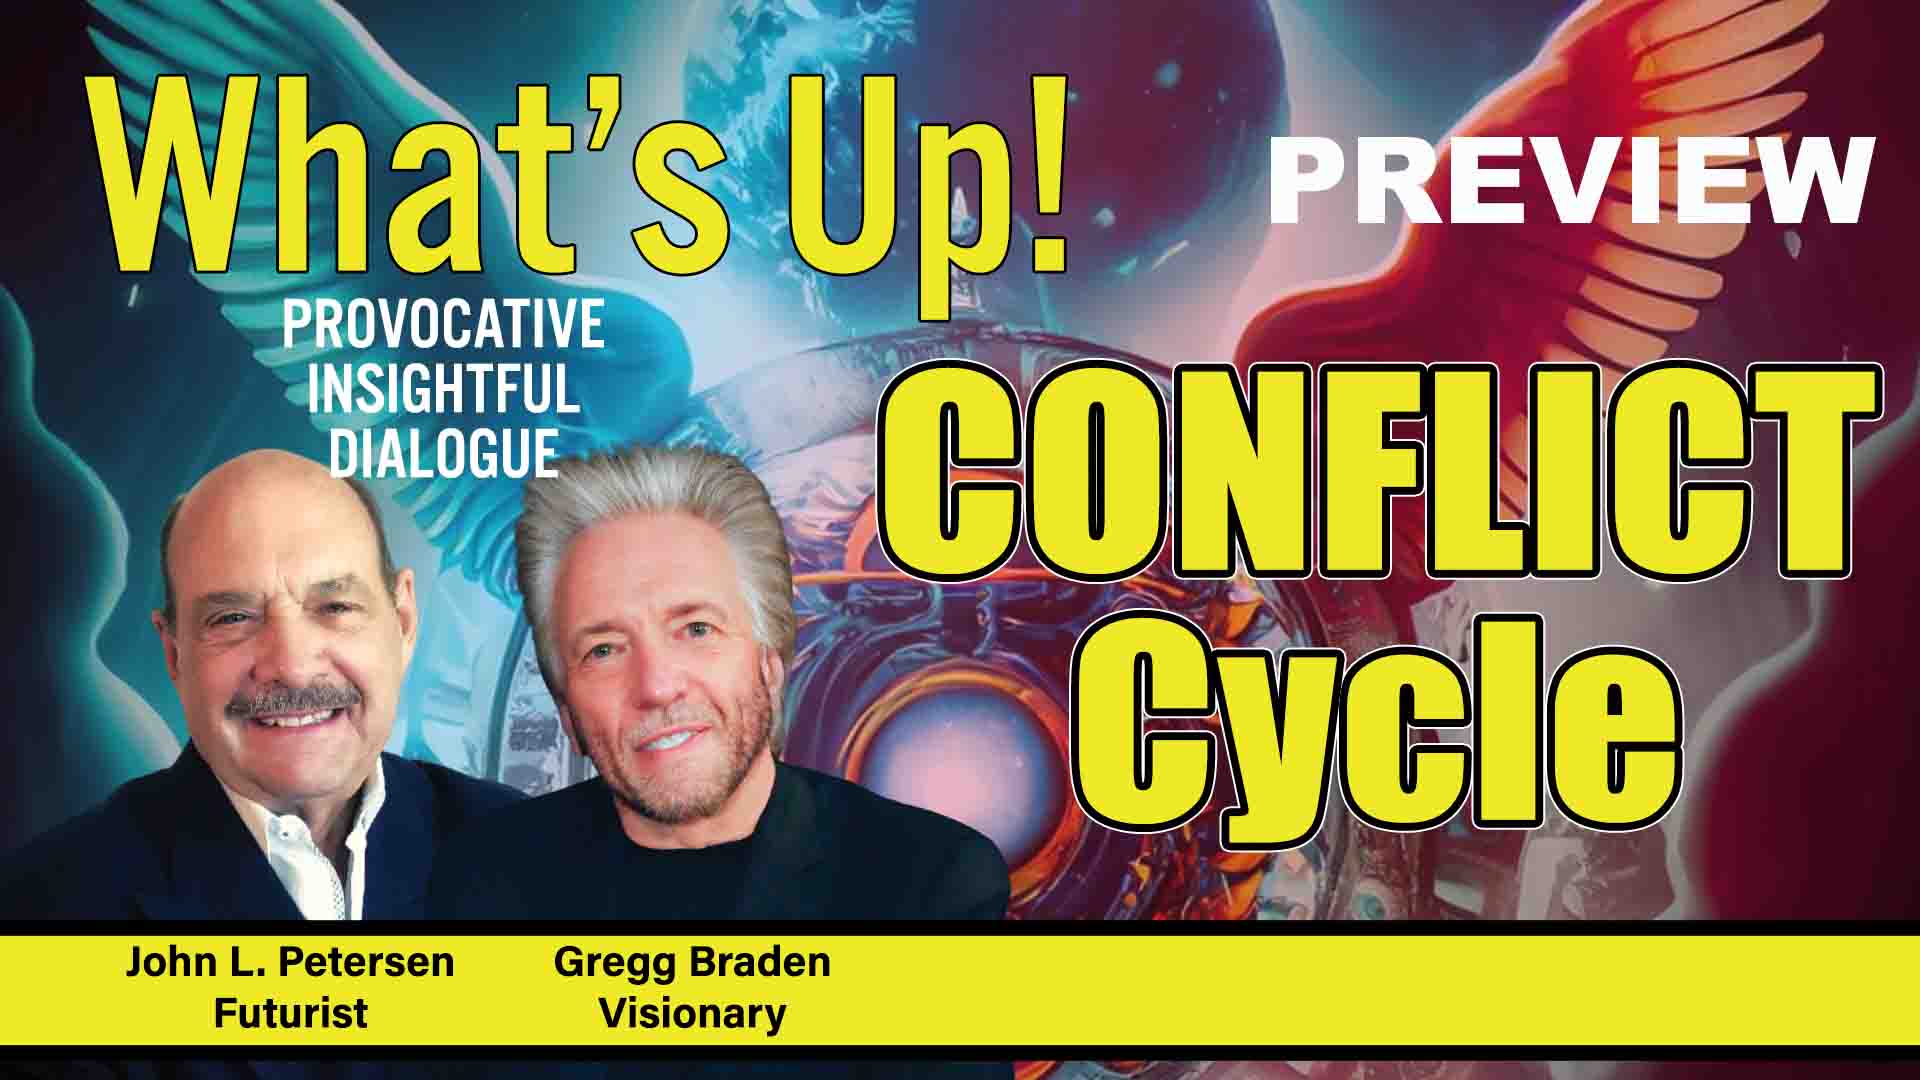 What's Up! preview - Conflict Cycle, with Gregg Braden, John Petersen